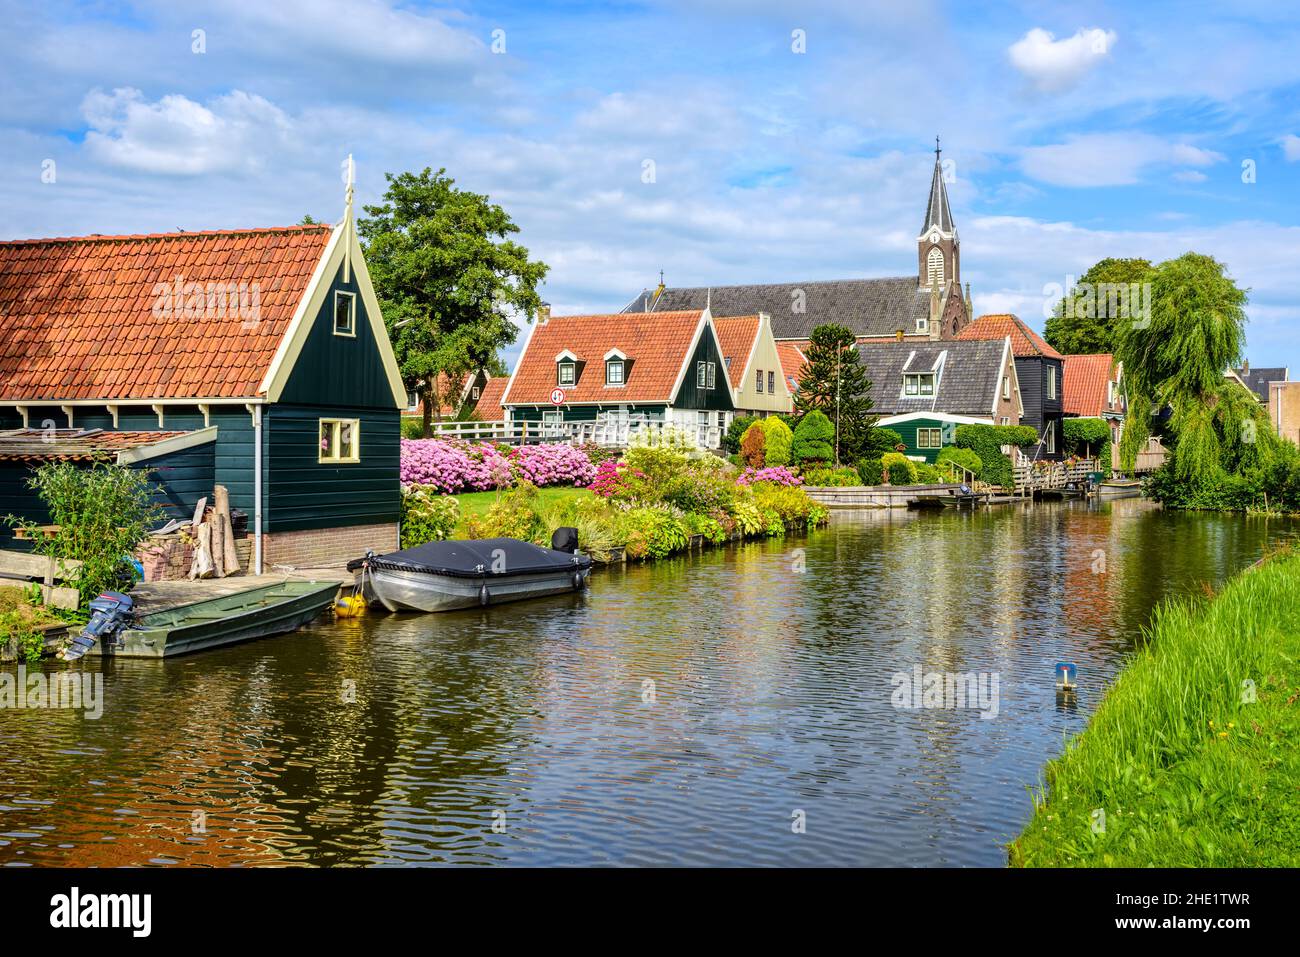 Picturesque idyllic De Rijp village in North Holland, Netherlands, view of characteristic wooden houses with red tiled roofs and flower beds and the c Stock Photo